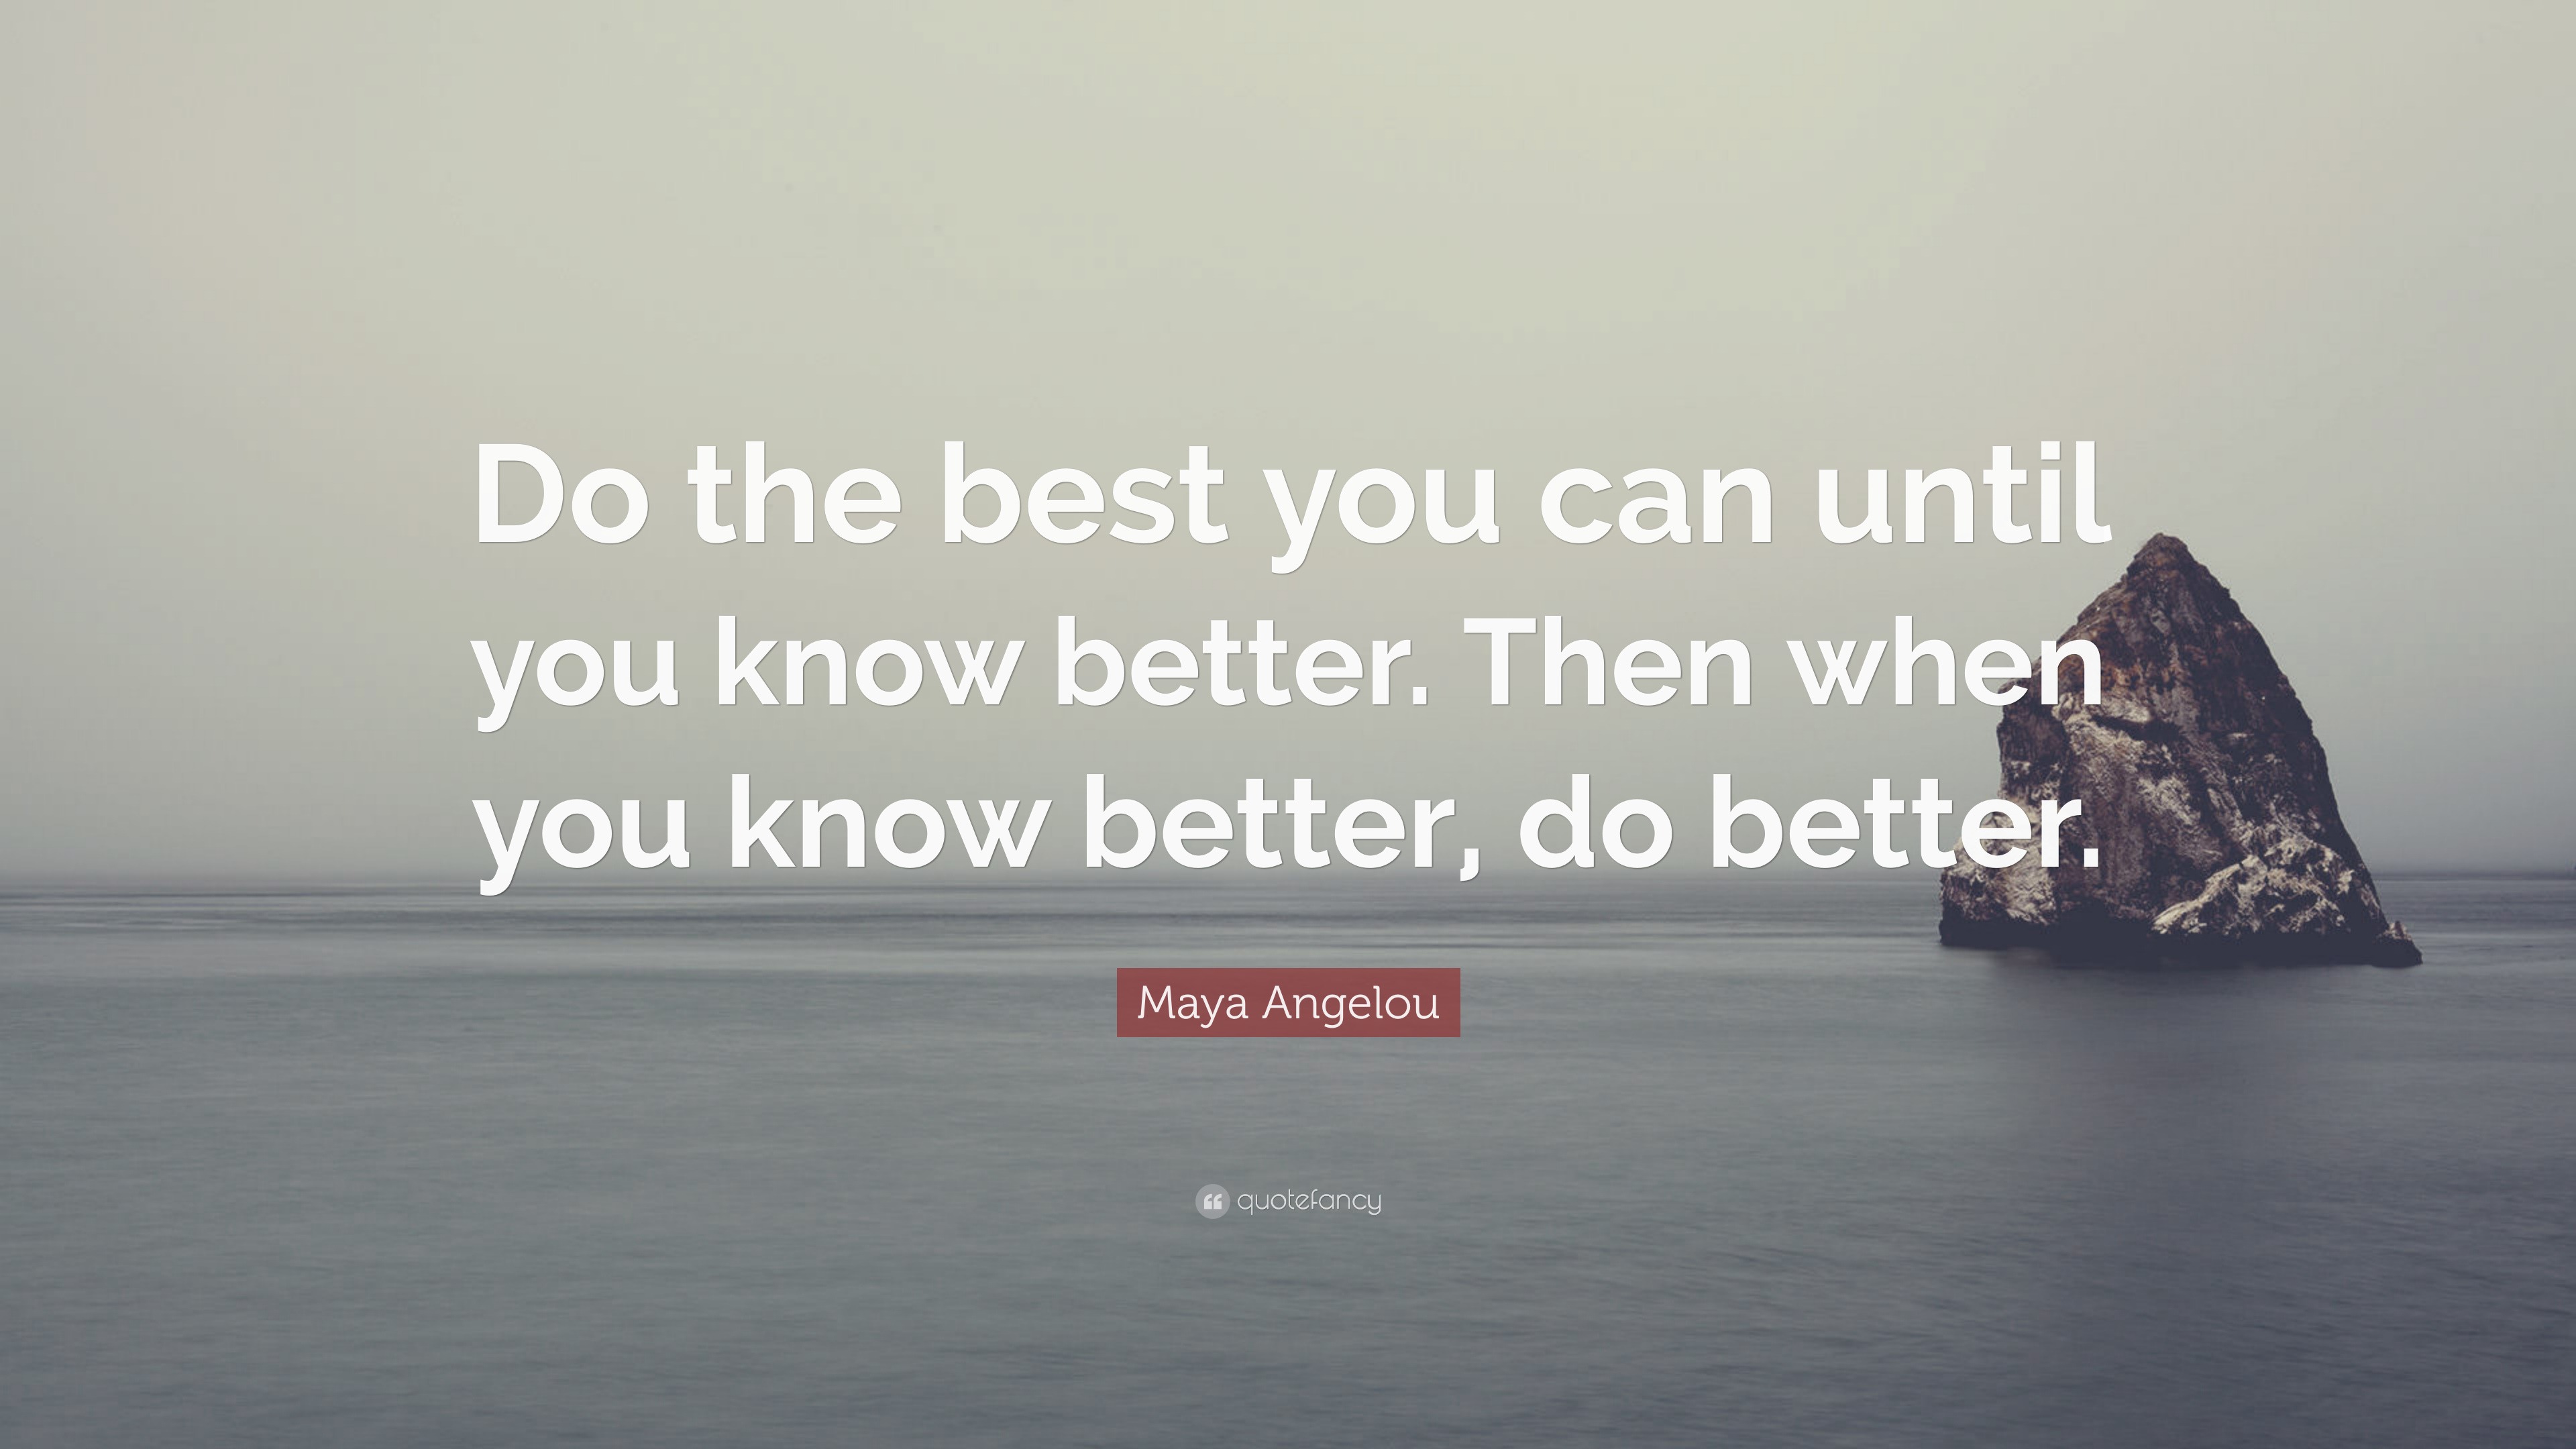 maya angelou quote when you know better